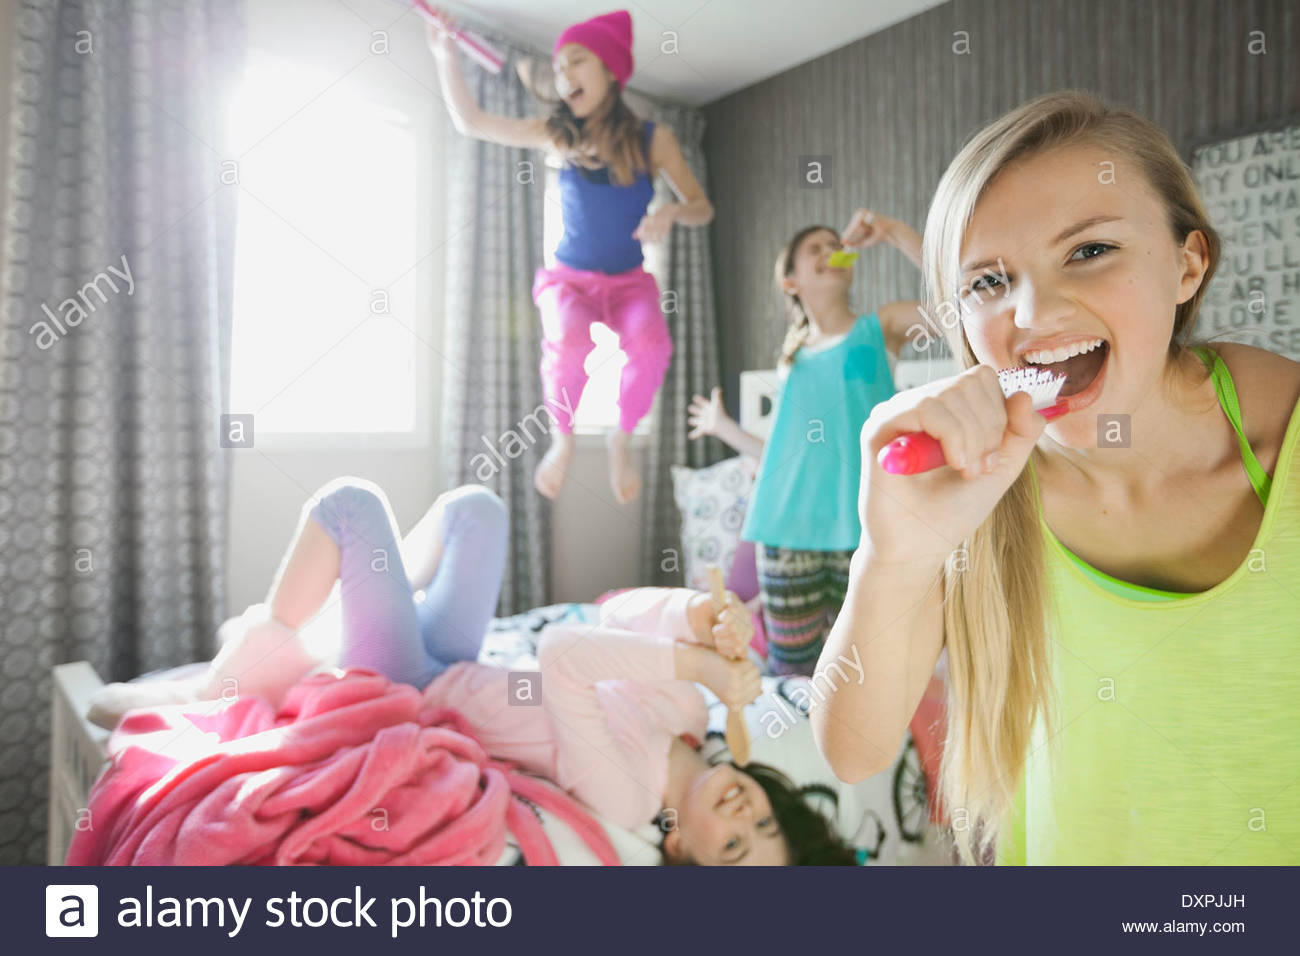 Girl singing into hairbrush at slumber party Banque D'Images